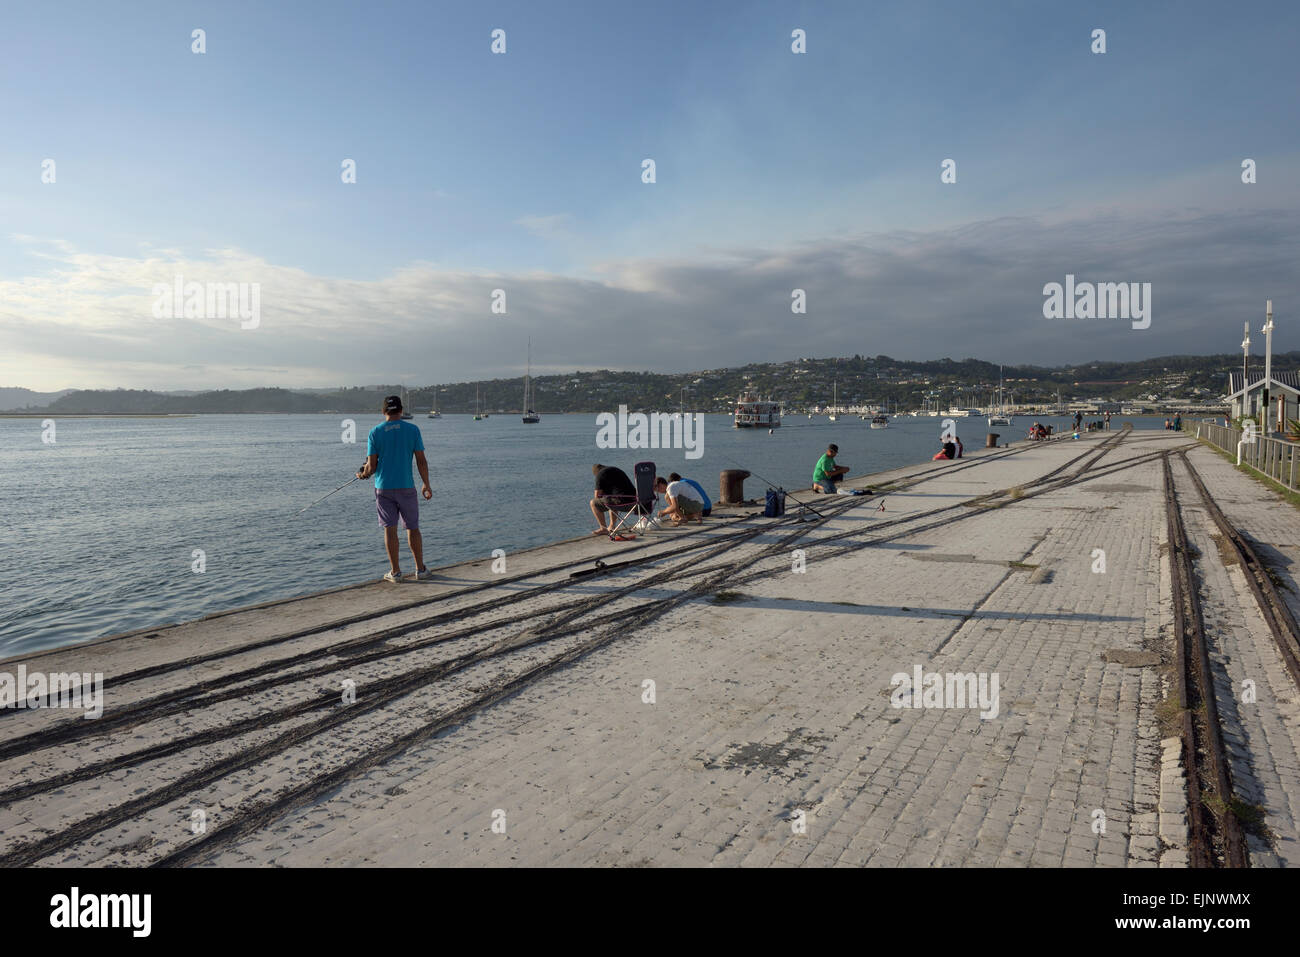 anglers at a pier in the late afternoon sun, Knysna, South Africa Stock Photo